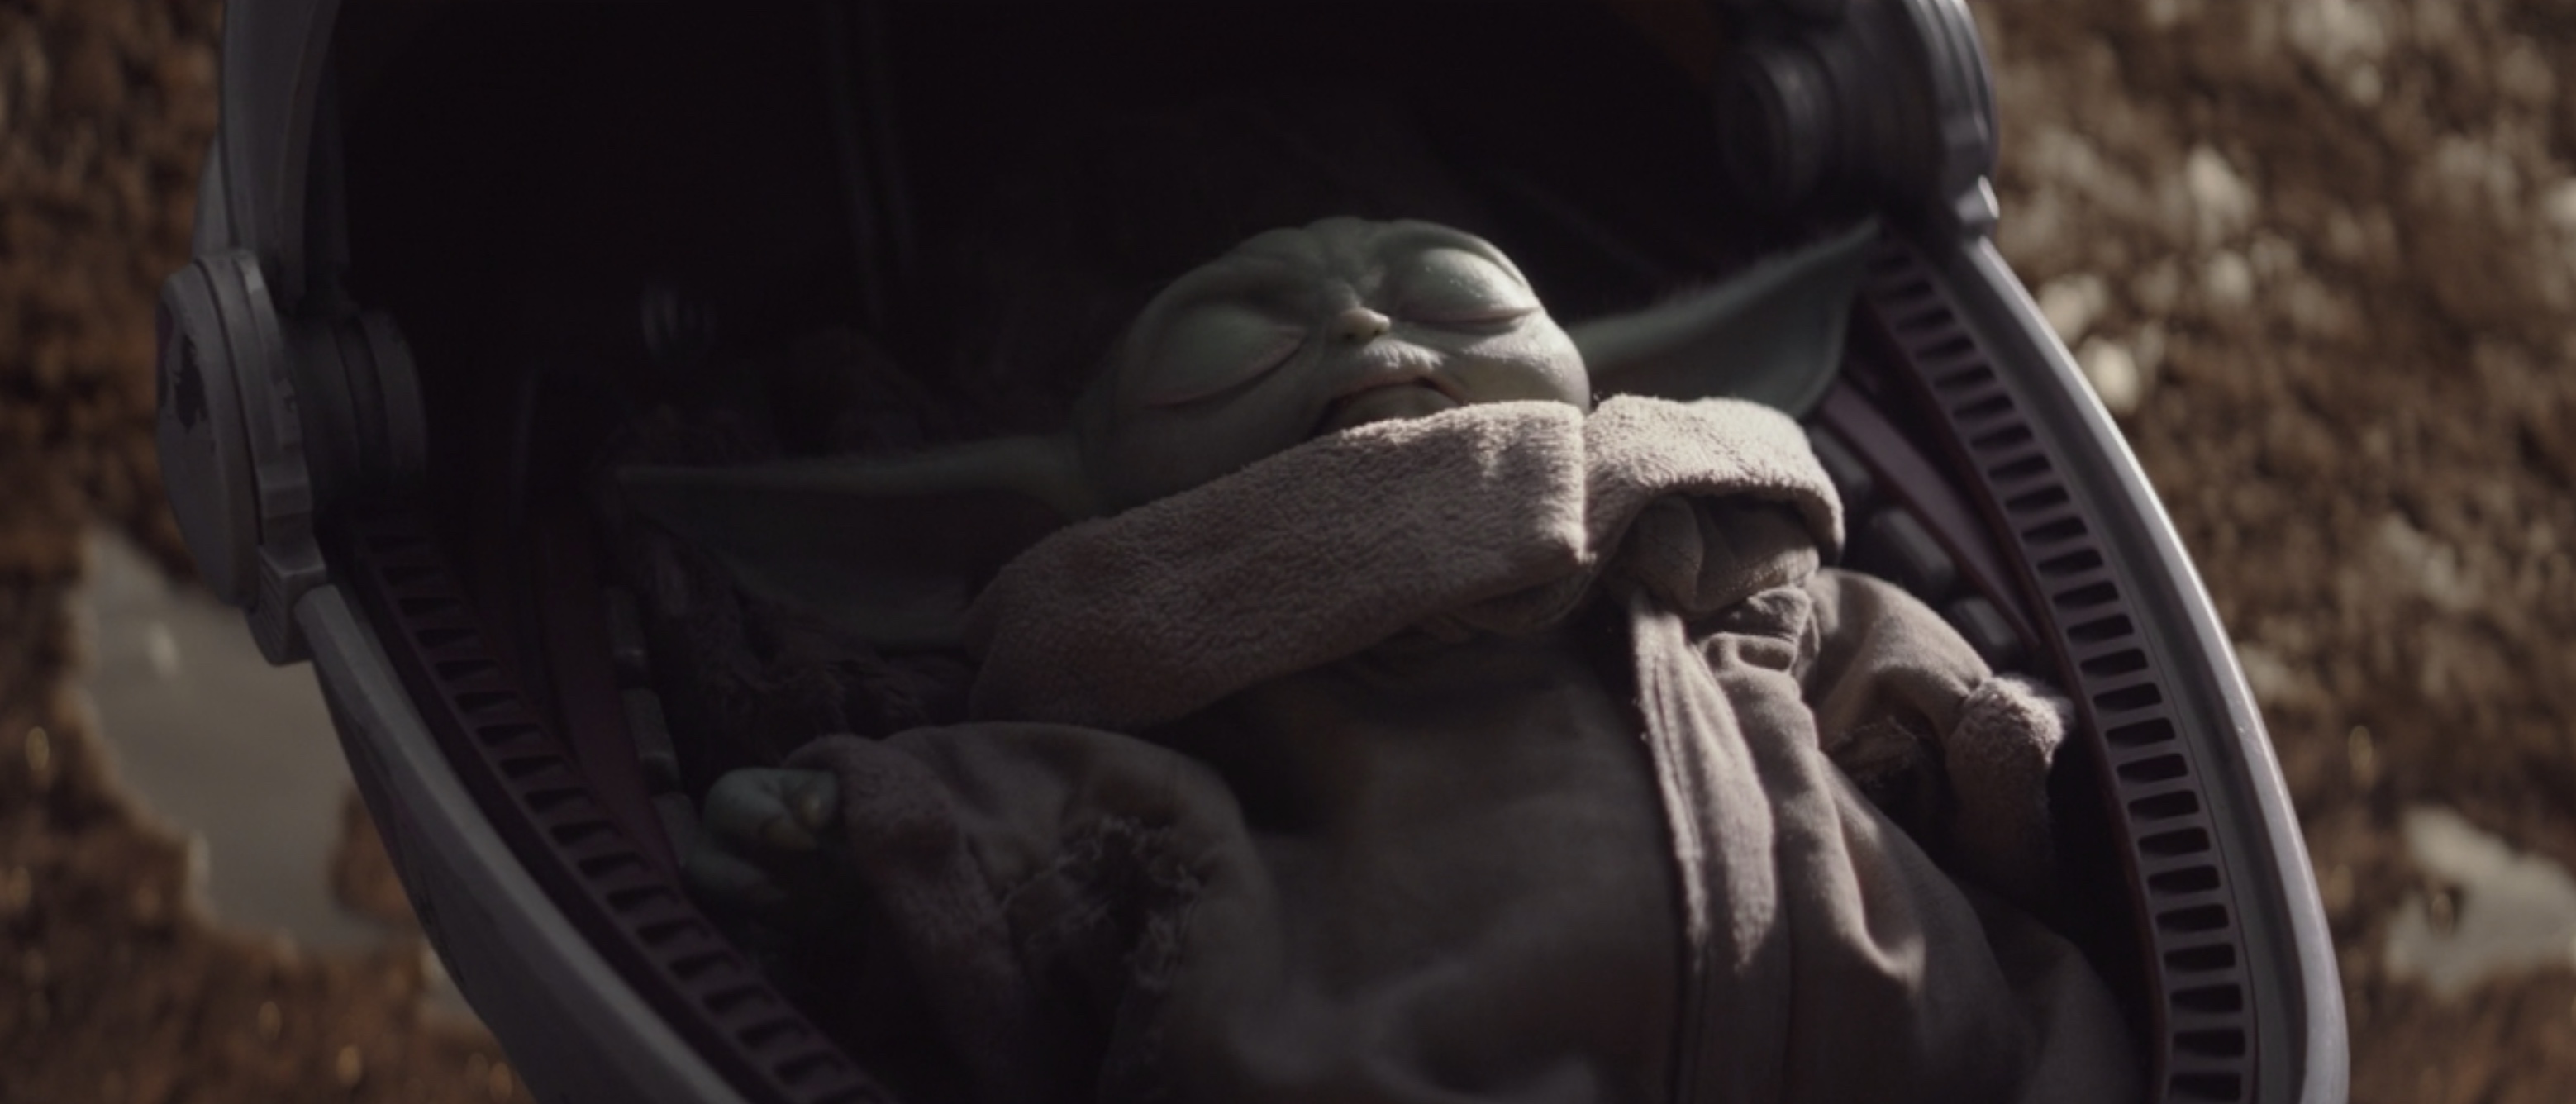 Baby Yoda sleeps in The Mandalorian, in his floating bed